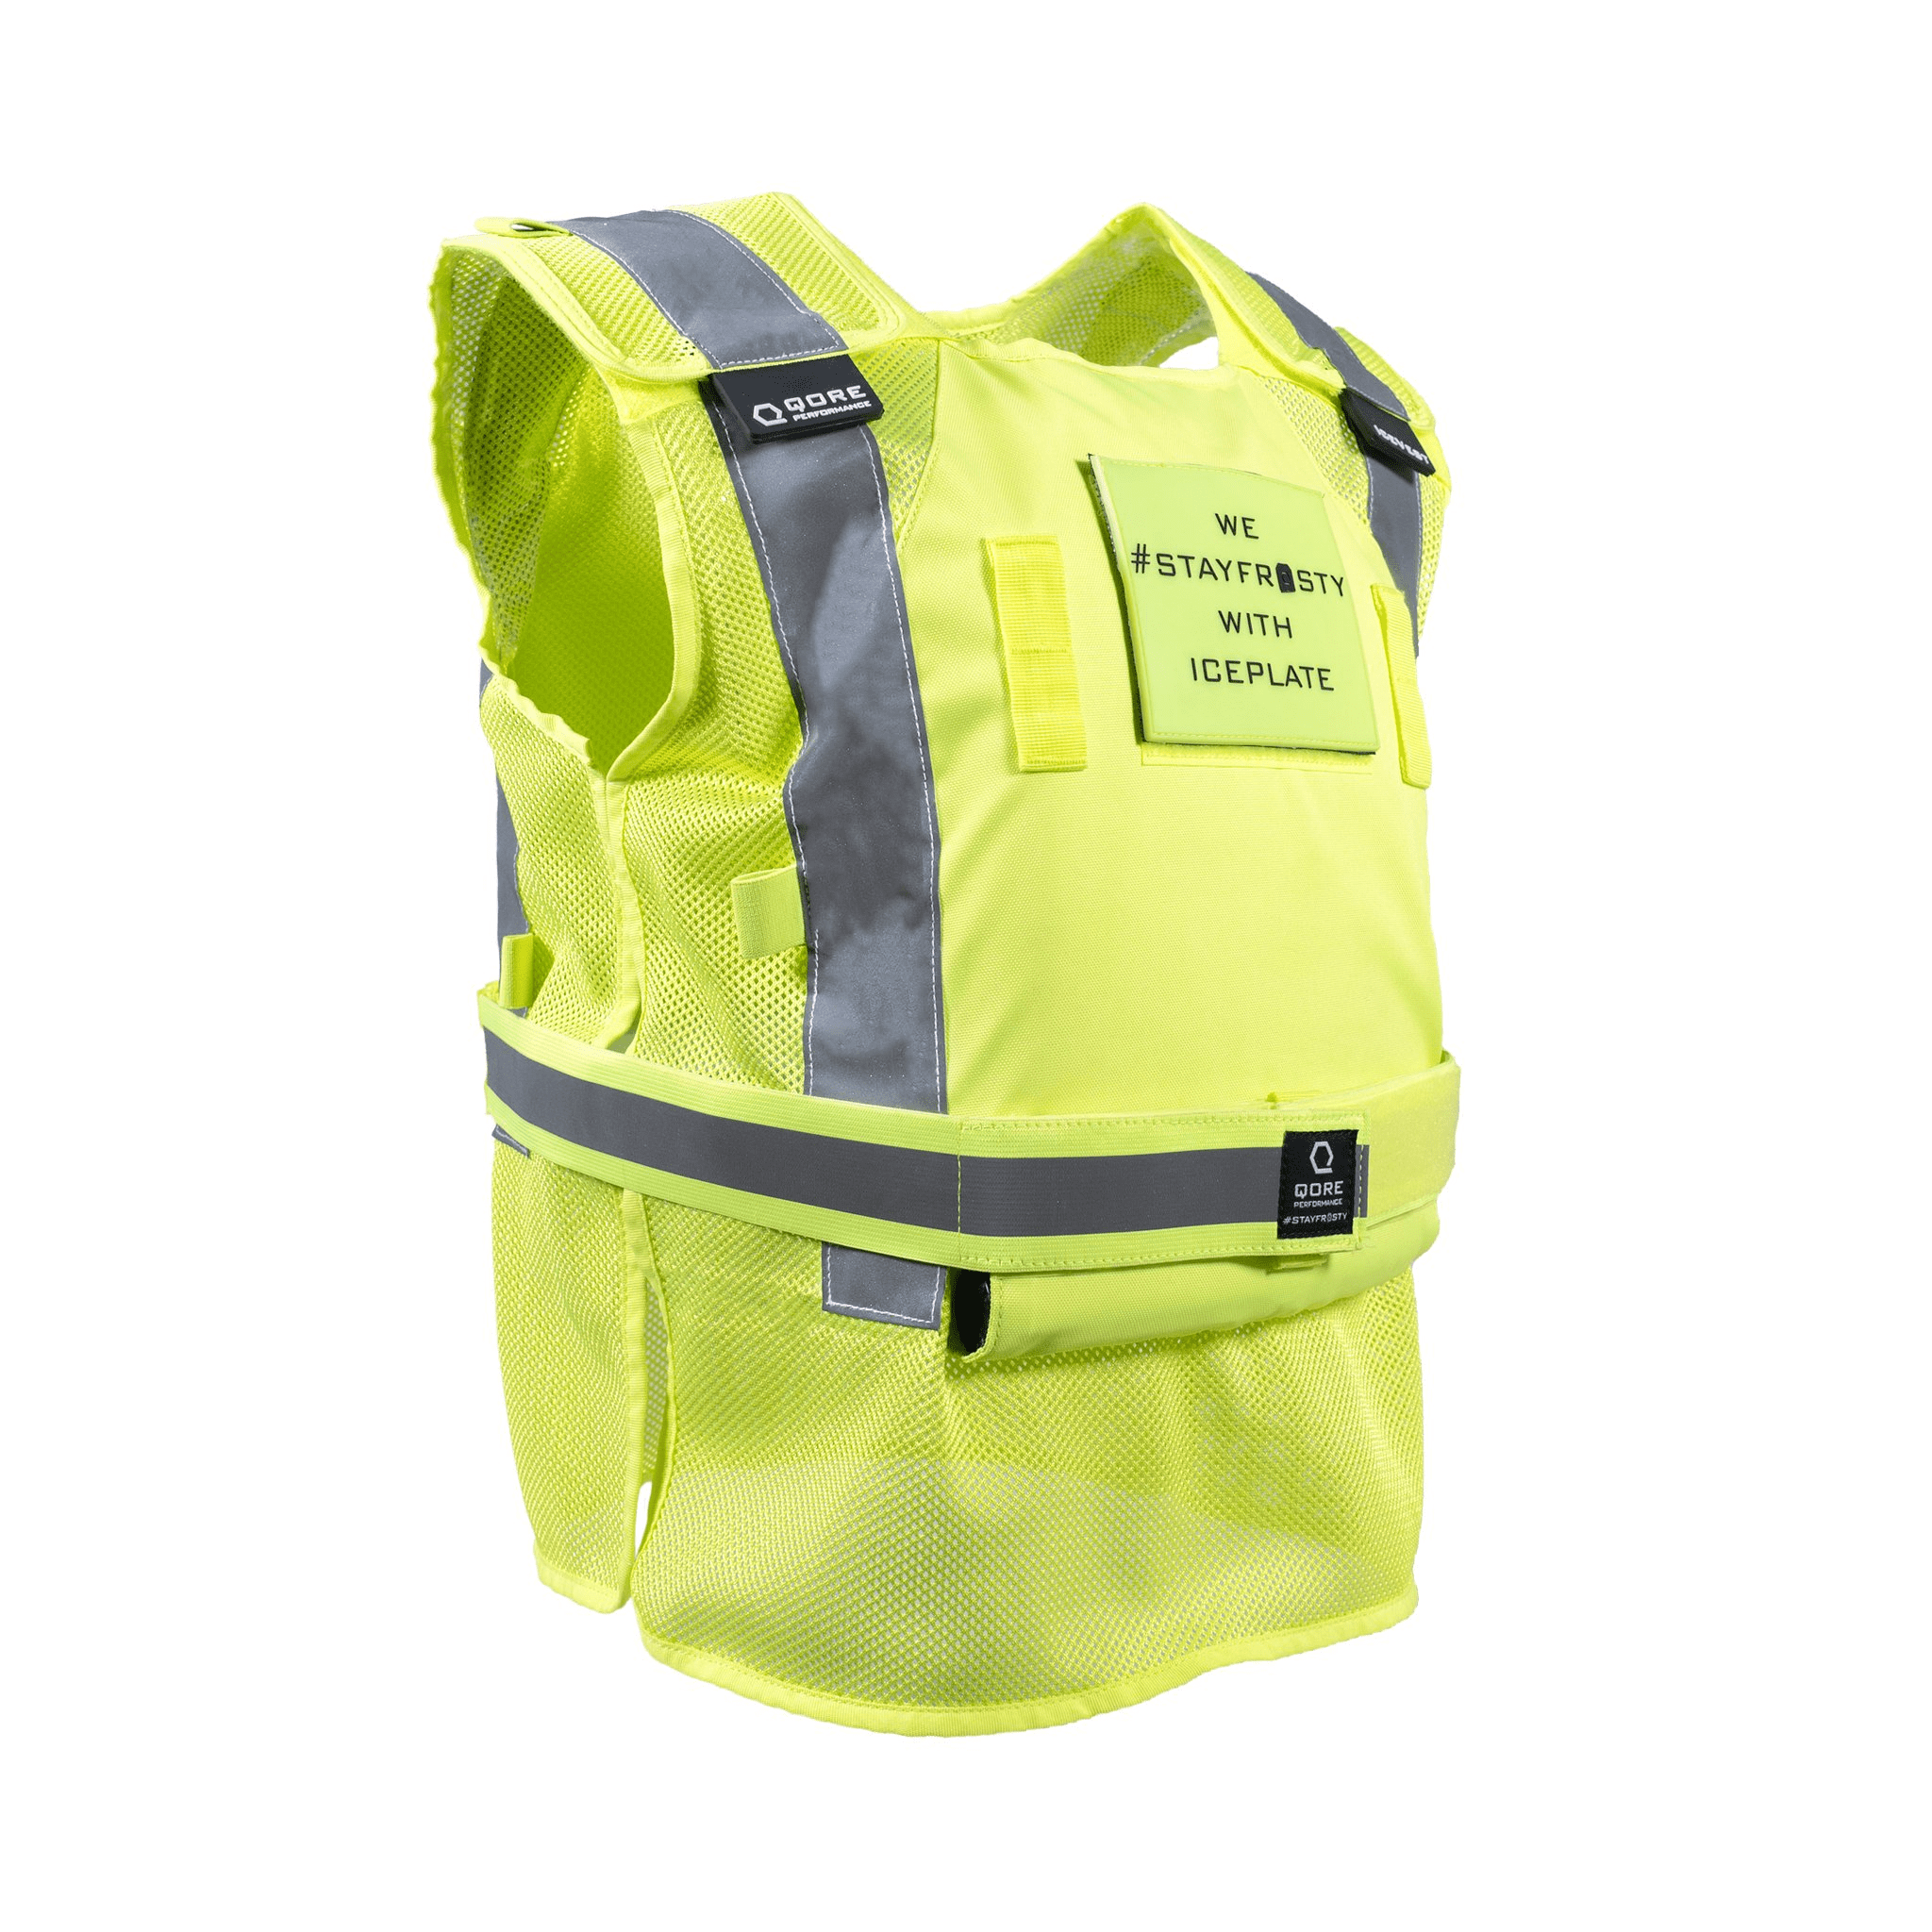 Cooling Safety Vest with 6 Ice Packs - Reflective Vest with Pockets and  Zipper High Visibility Vest for Men Women